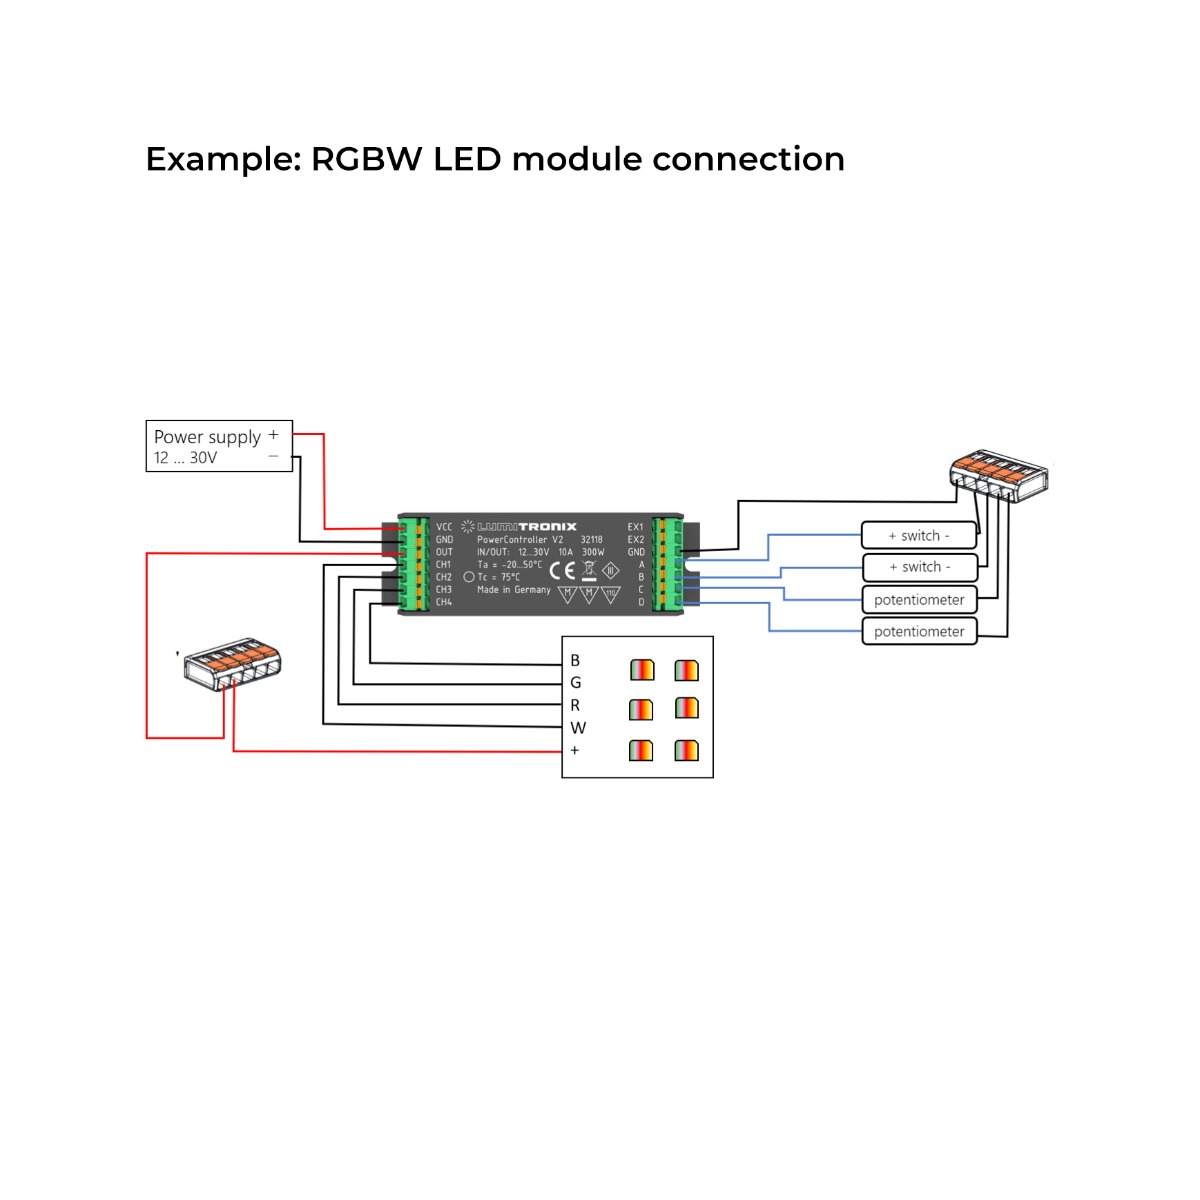 PowerController V2 Light Control Unit 1- 4 control channels for Tunable White, RGBW or single color